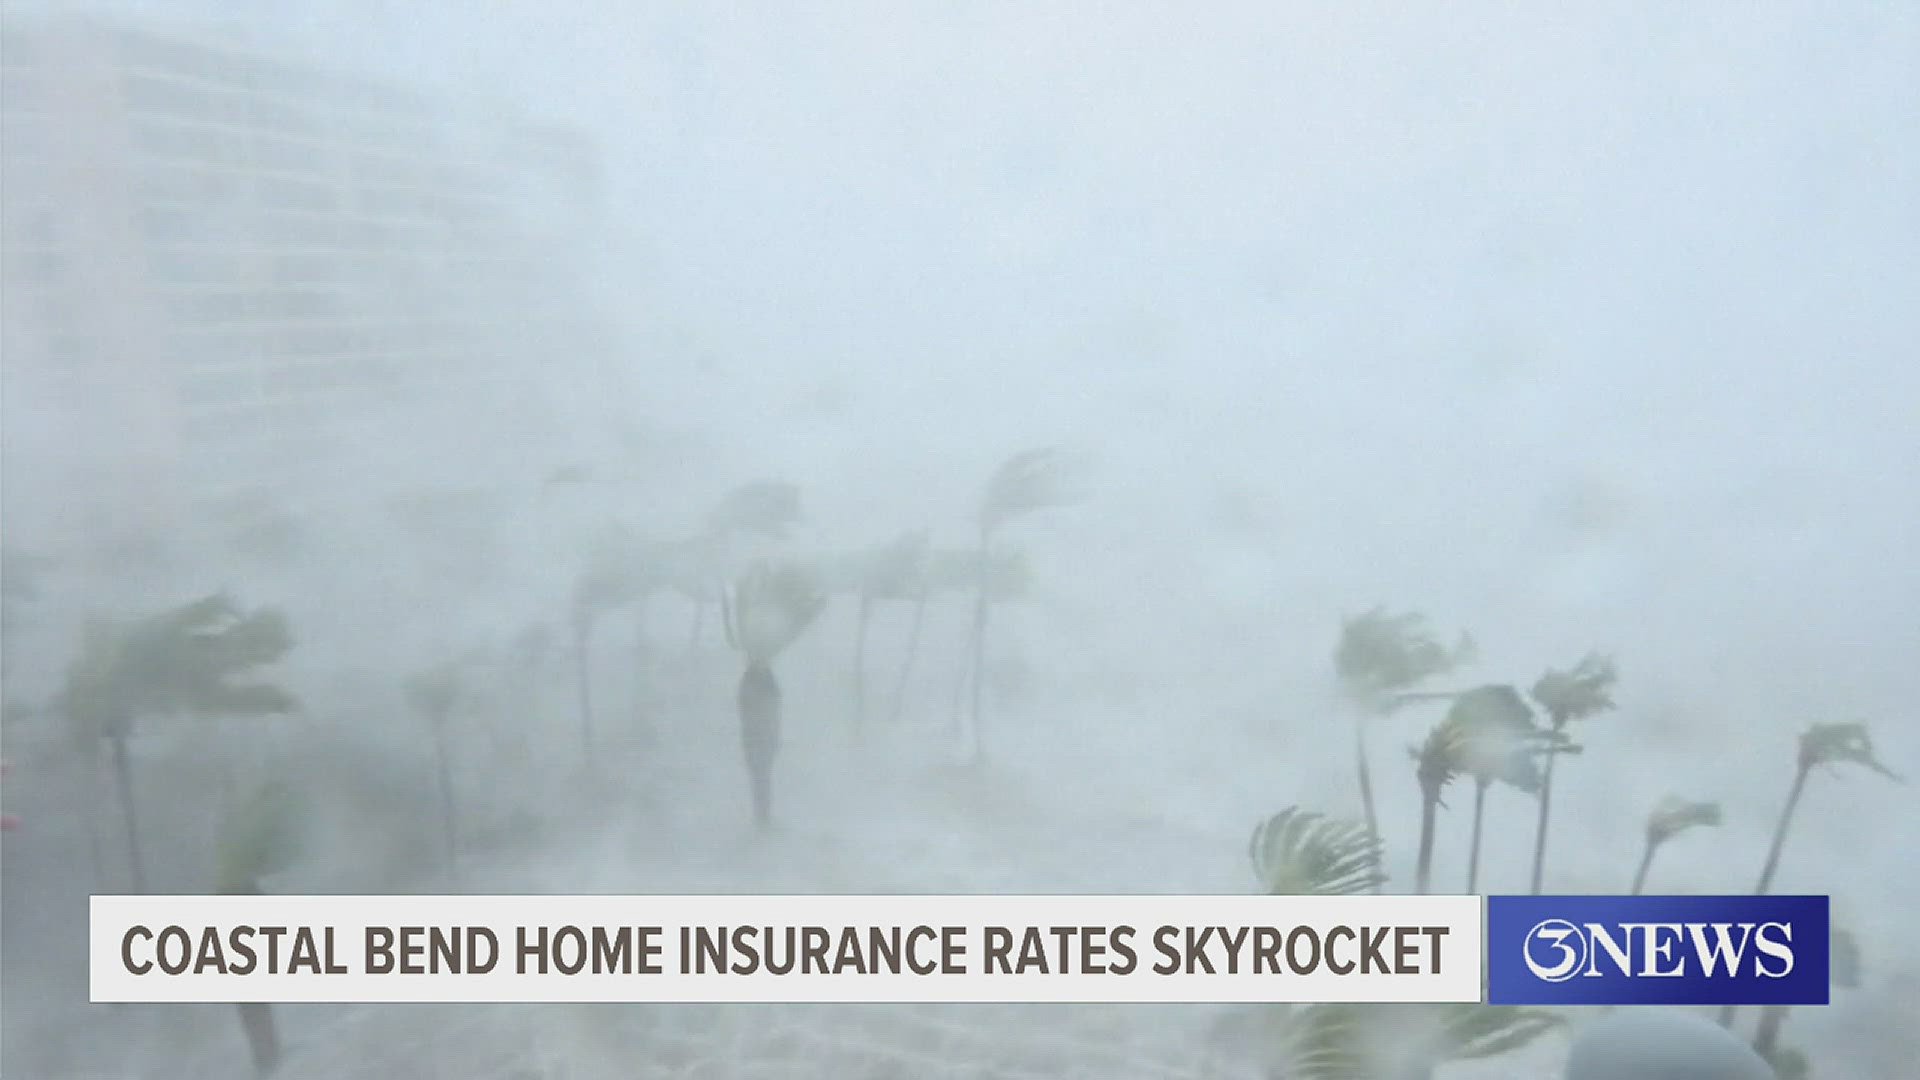 Officials encourage everyone to review their home insurance policies before the start of hurricane season June 1.